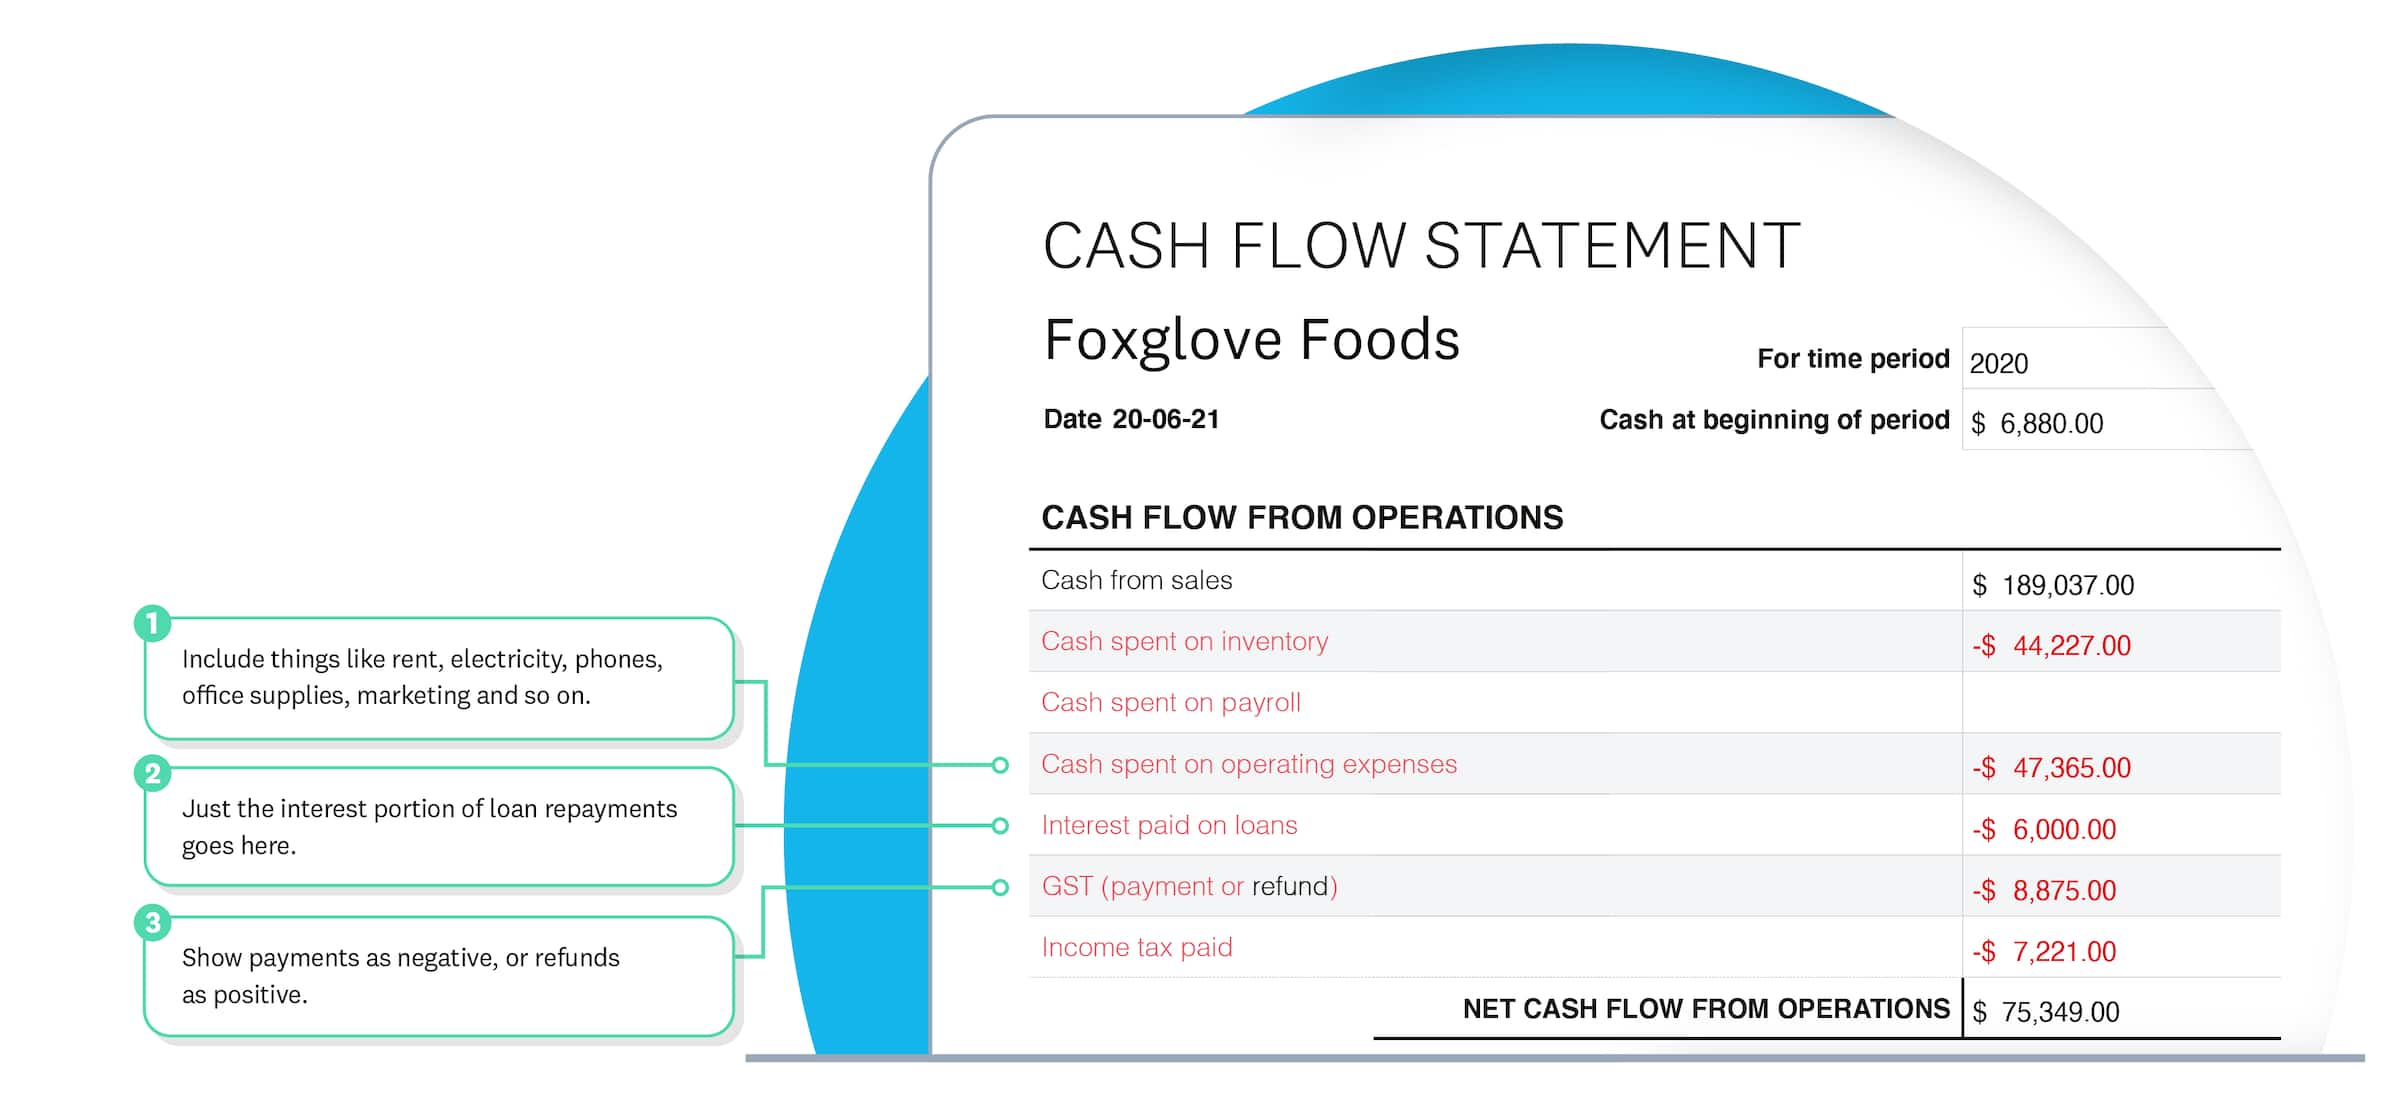 Cash flow from operations shows money in from sales, minus money out on stock, payroll, operations, loan interest and tax